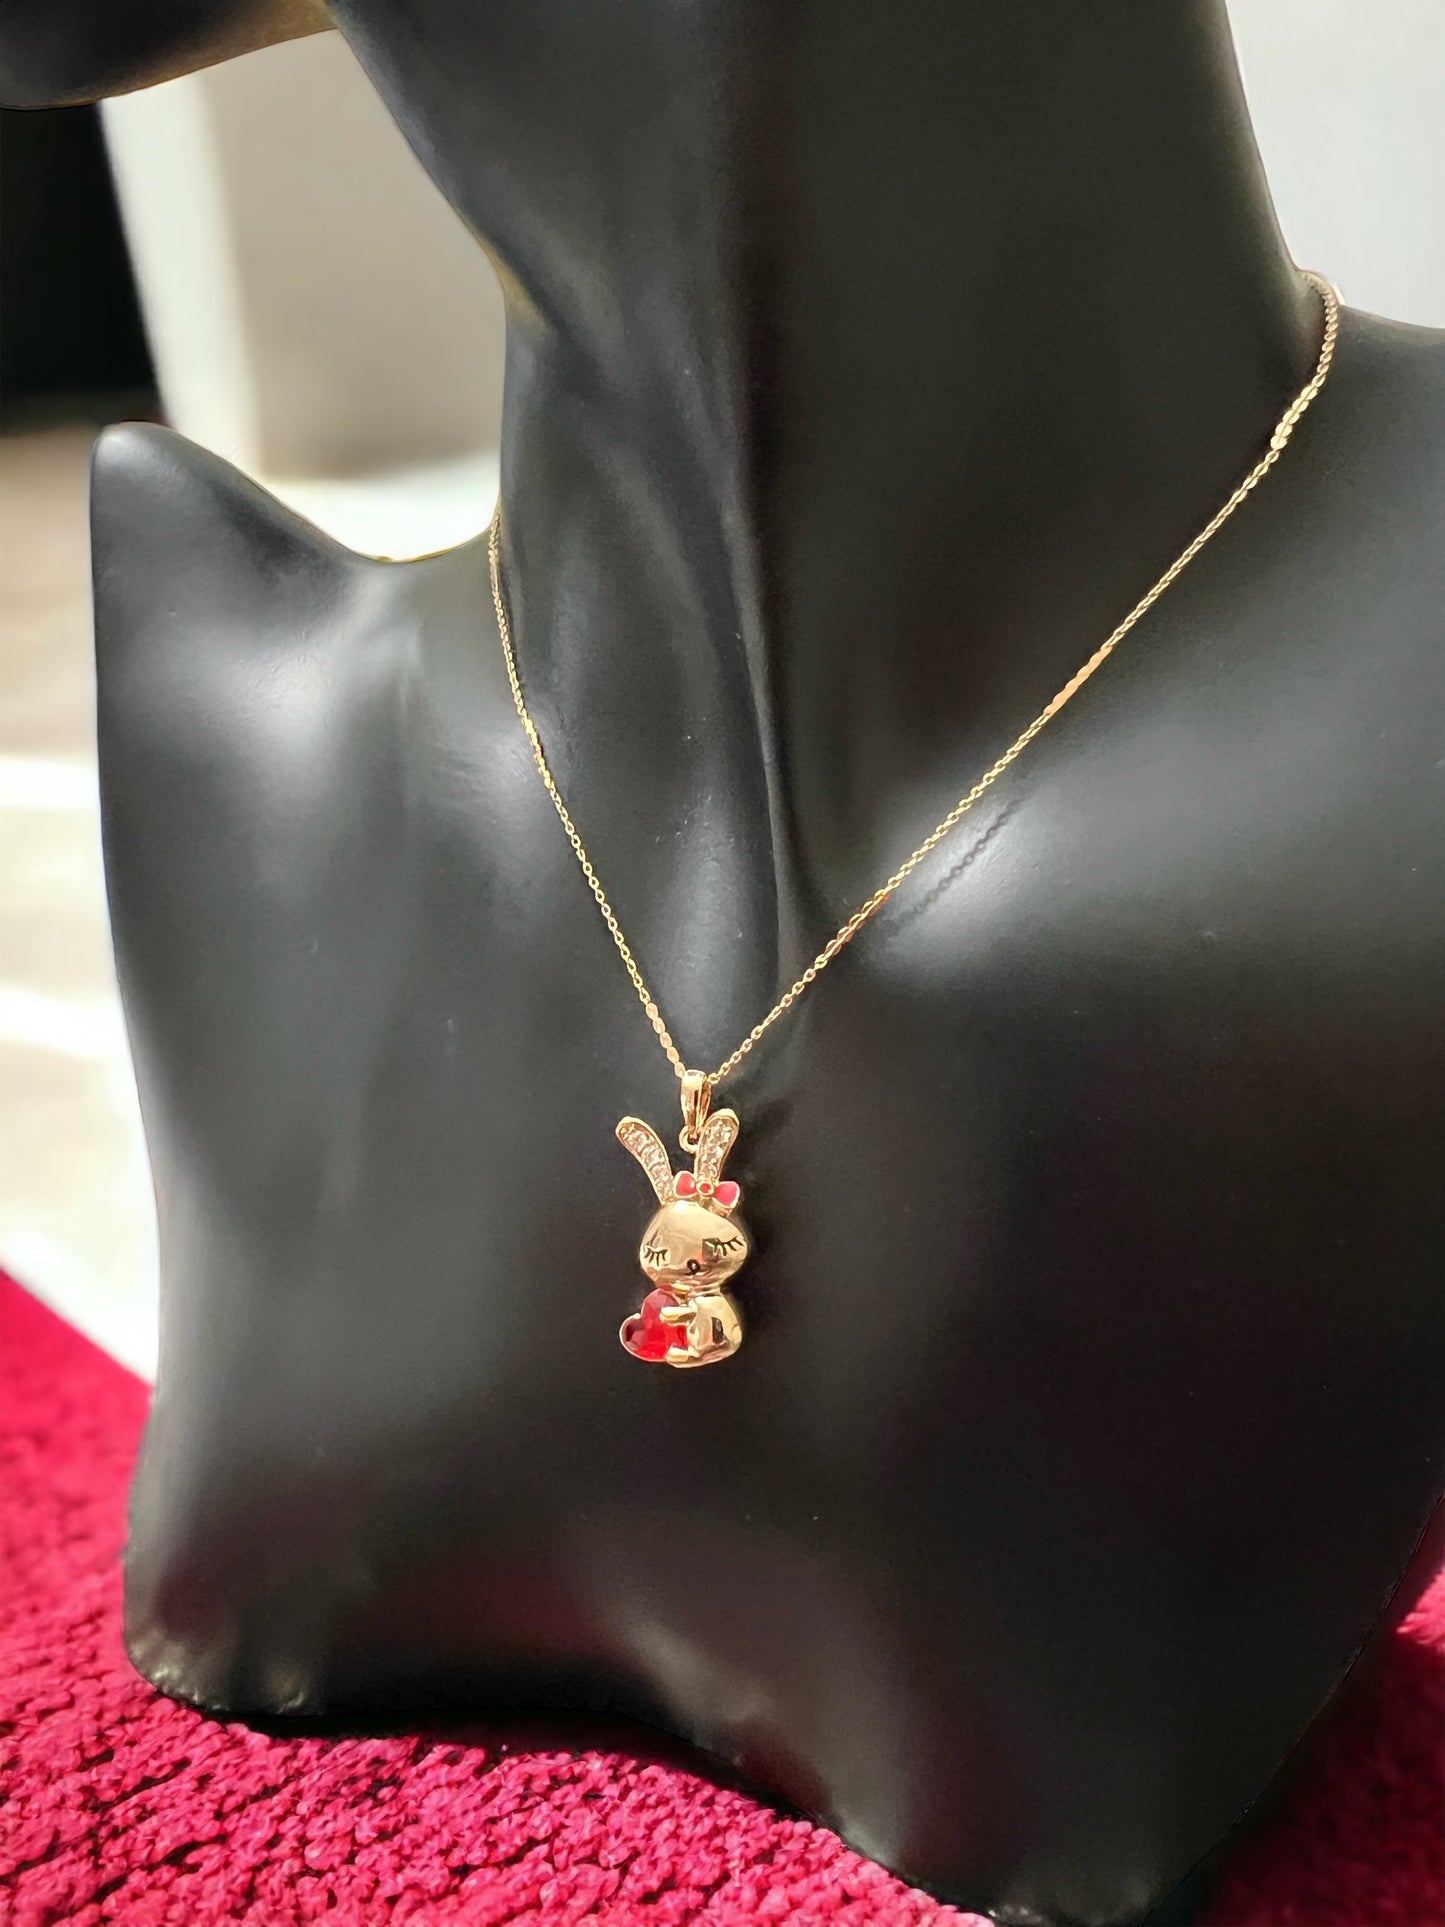 Playful Chic: Gold Bunny Necklace with Red Heart Crystal - Gold Plated and Hypoallergenic for Whimsical Elegance